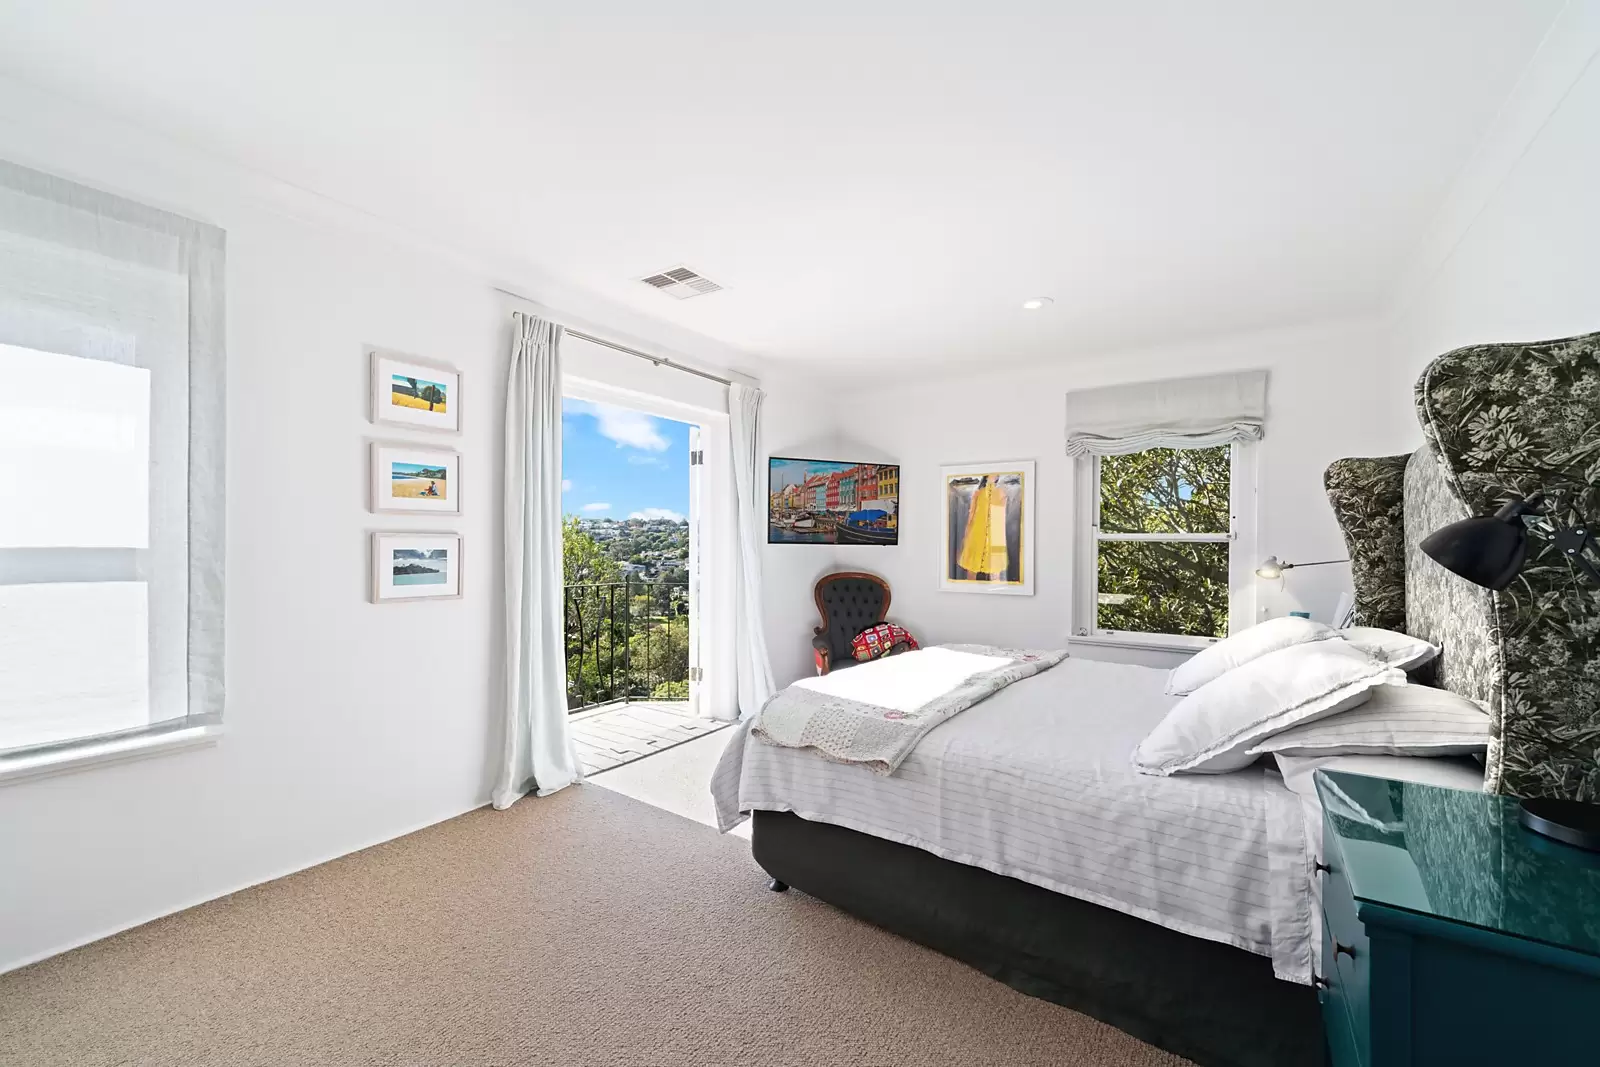 Photo #8: 6/275 Edgecliff Road, Woollahra - Sold by Sydney Sotheby's International Realty